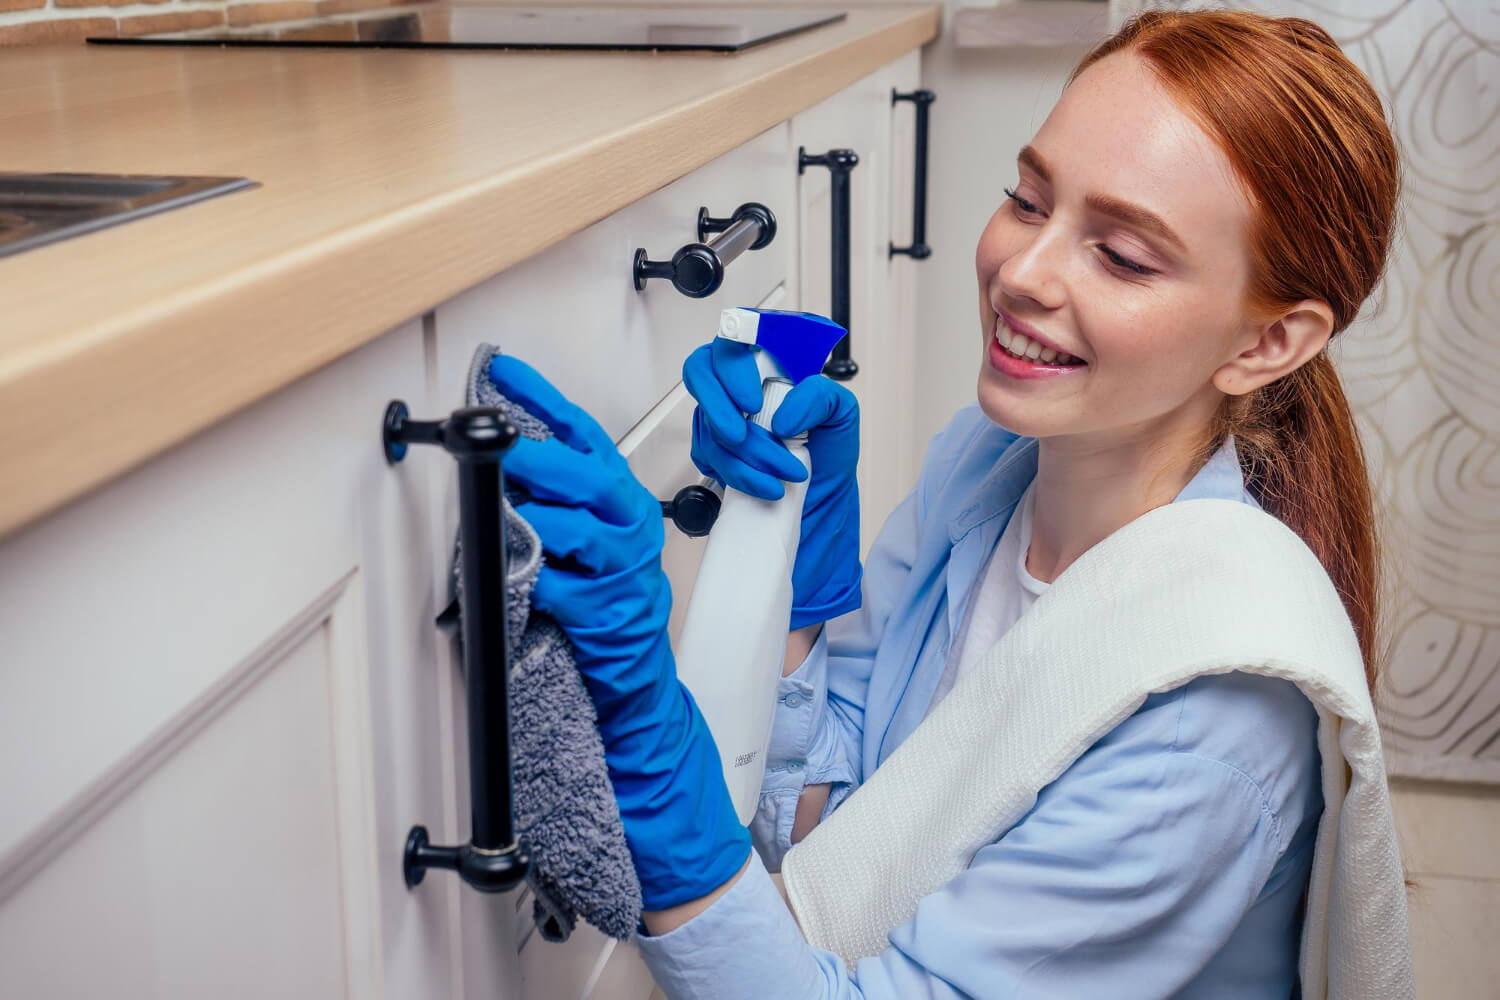 red haired woman close up smilling while cleaning kitchen with blue gloves and holding cleaning spray and grey cloth